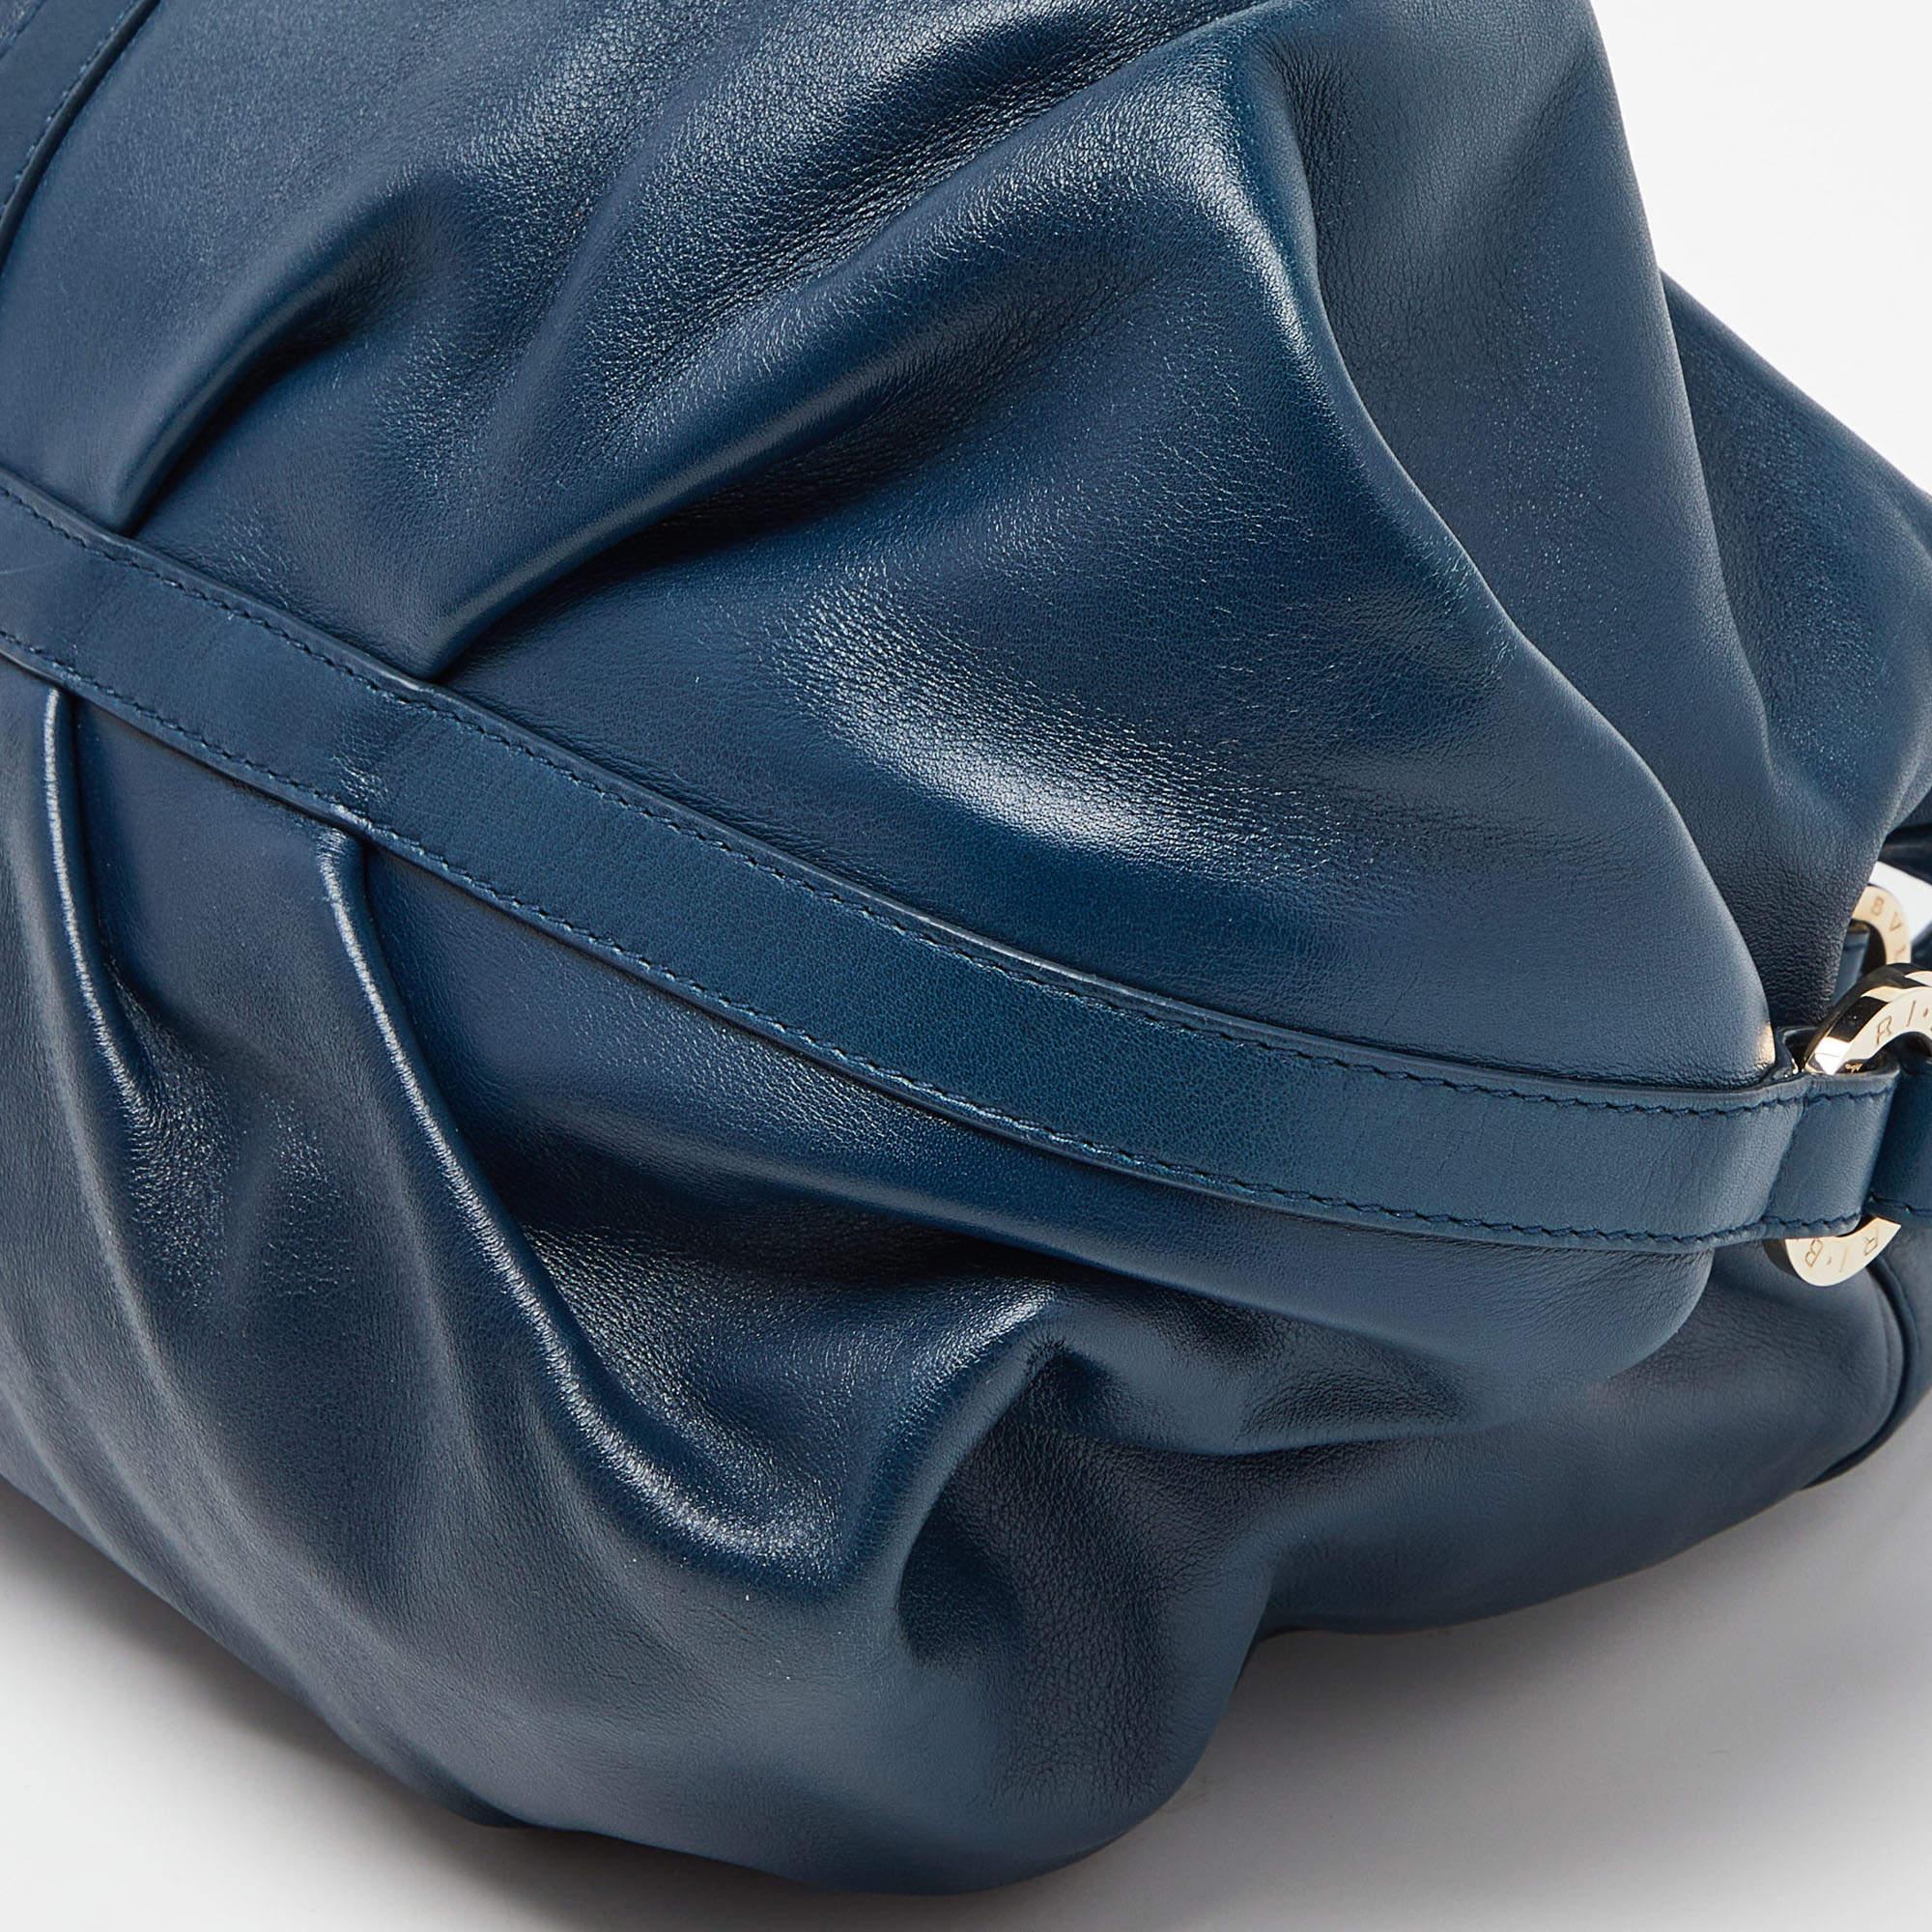 Bvlgari Teal Blue Leather Chandra Hobo For Sale 1